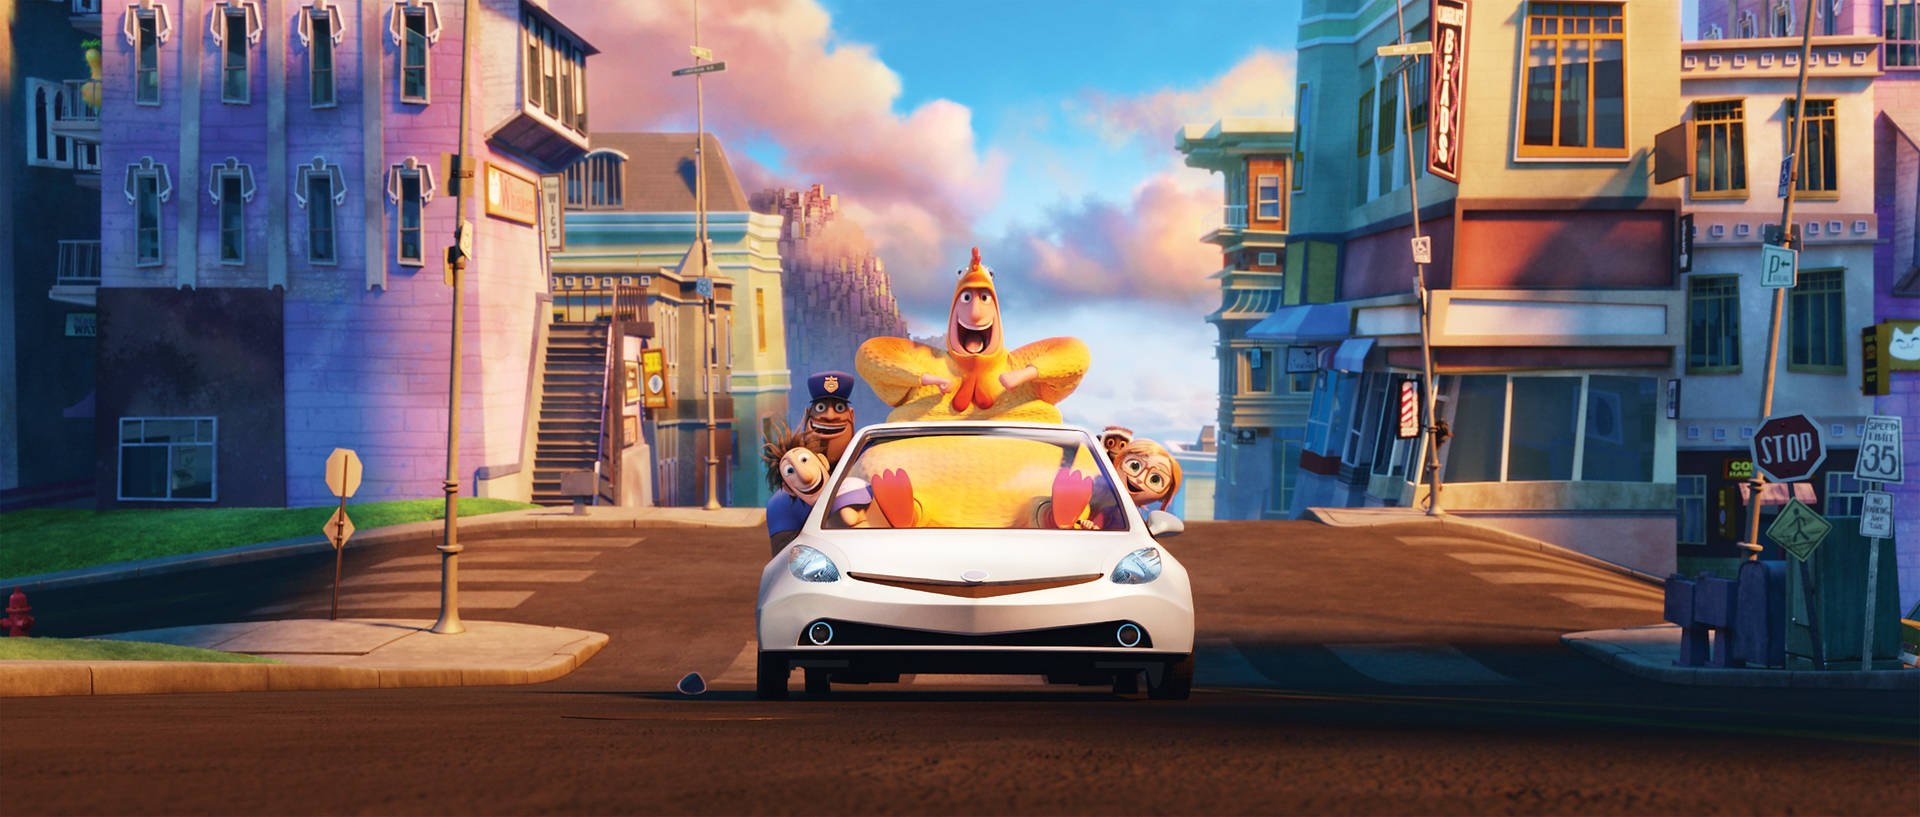 Cloudy With A Chance Of Meatballs 2 Characters Riding A Car Wallpaper